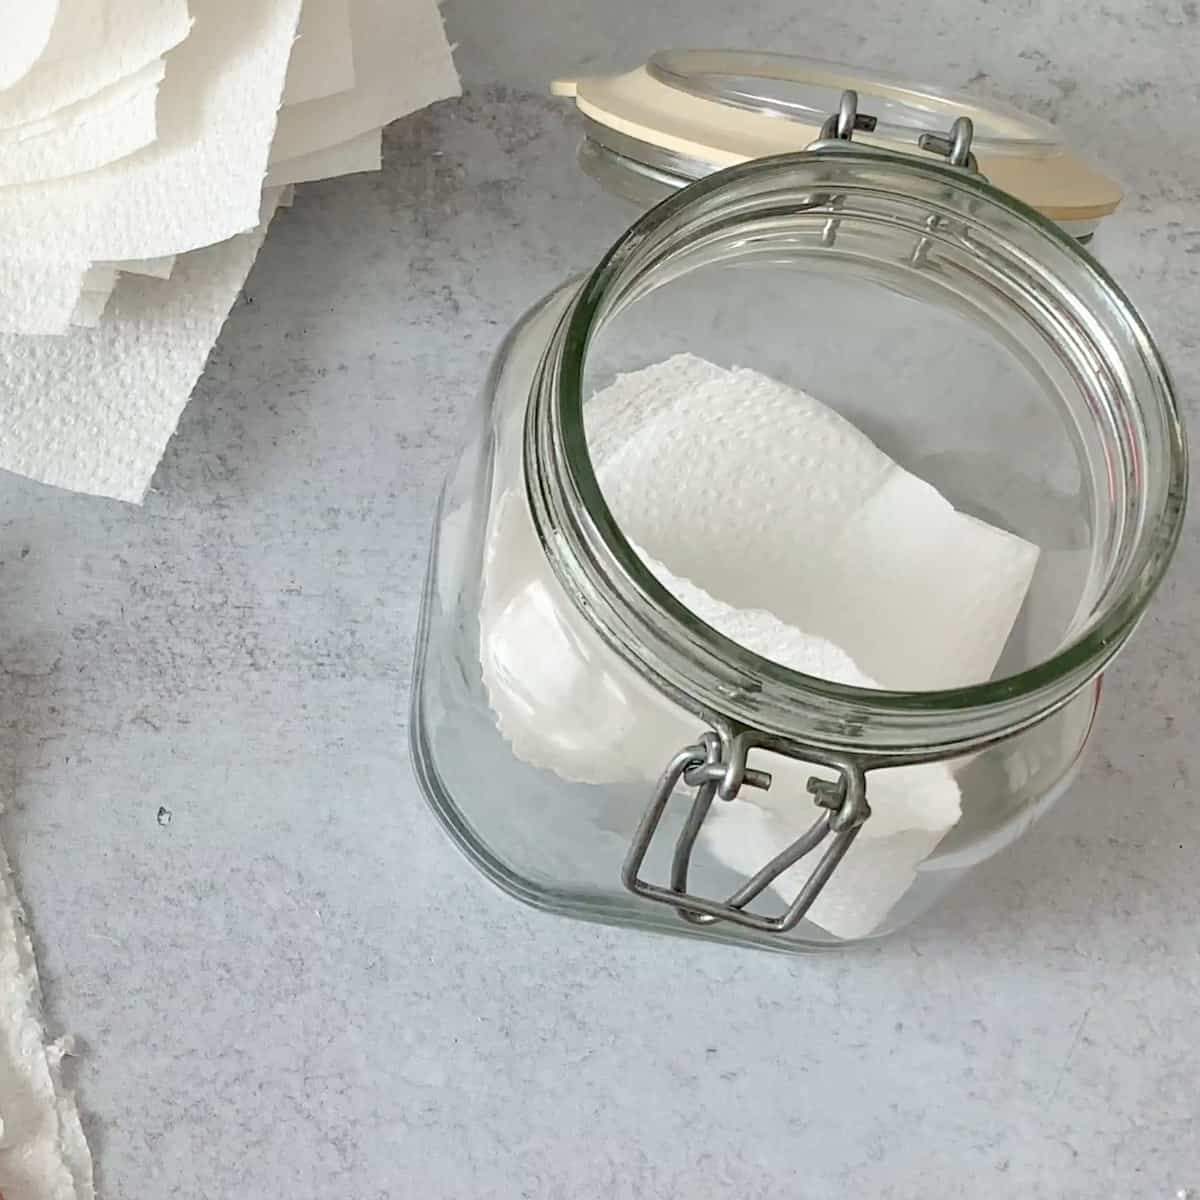 paper towels in jar for hand sanitizing wipes